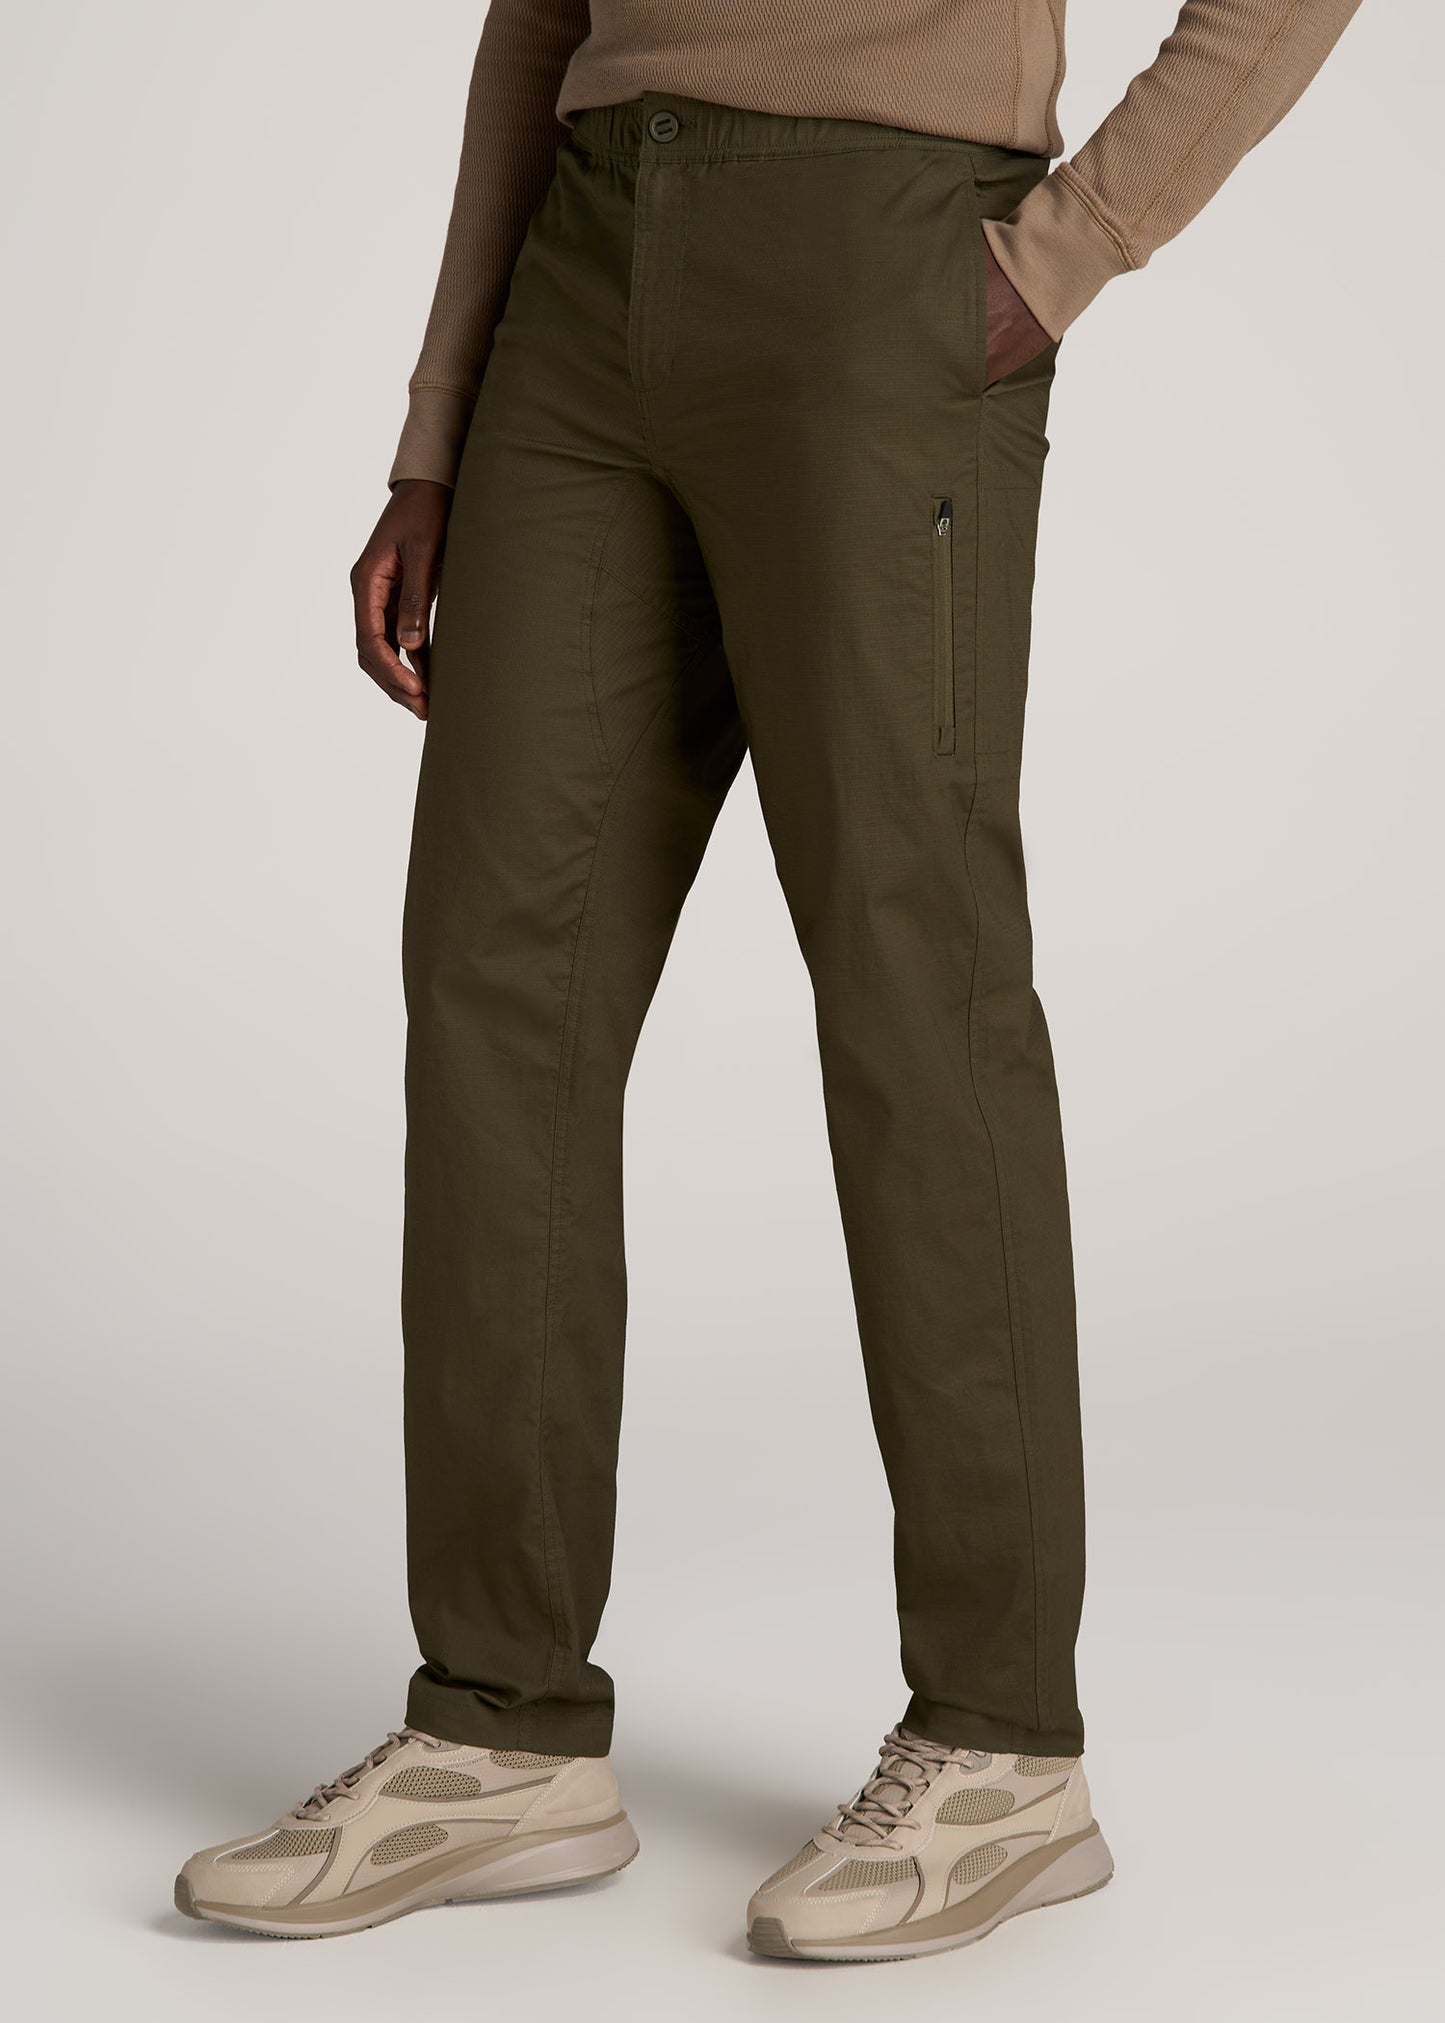 TAPERED-FIT Ripstop Pants for Tall Men in Oregano